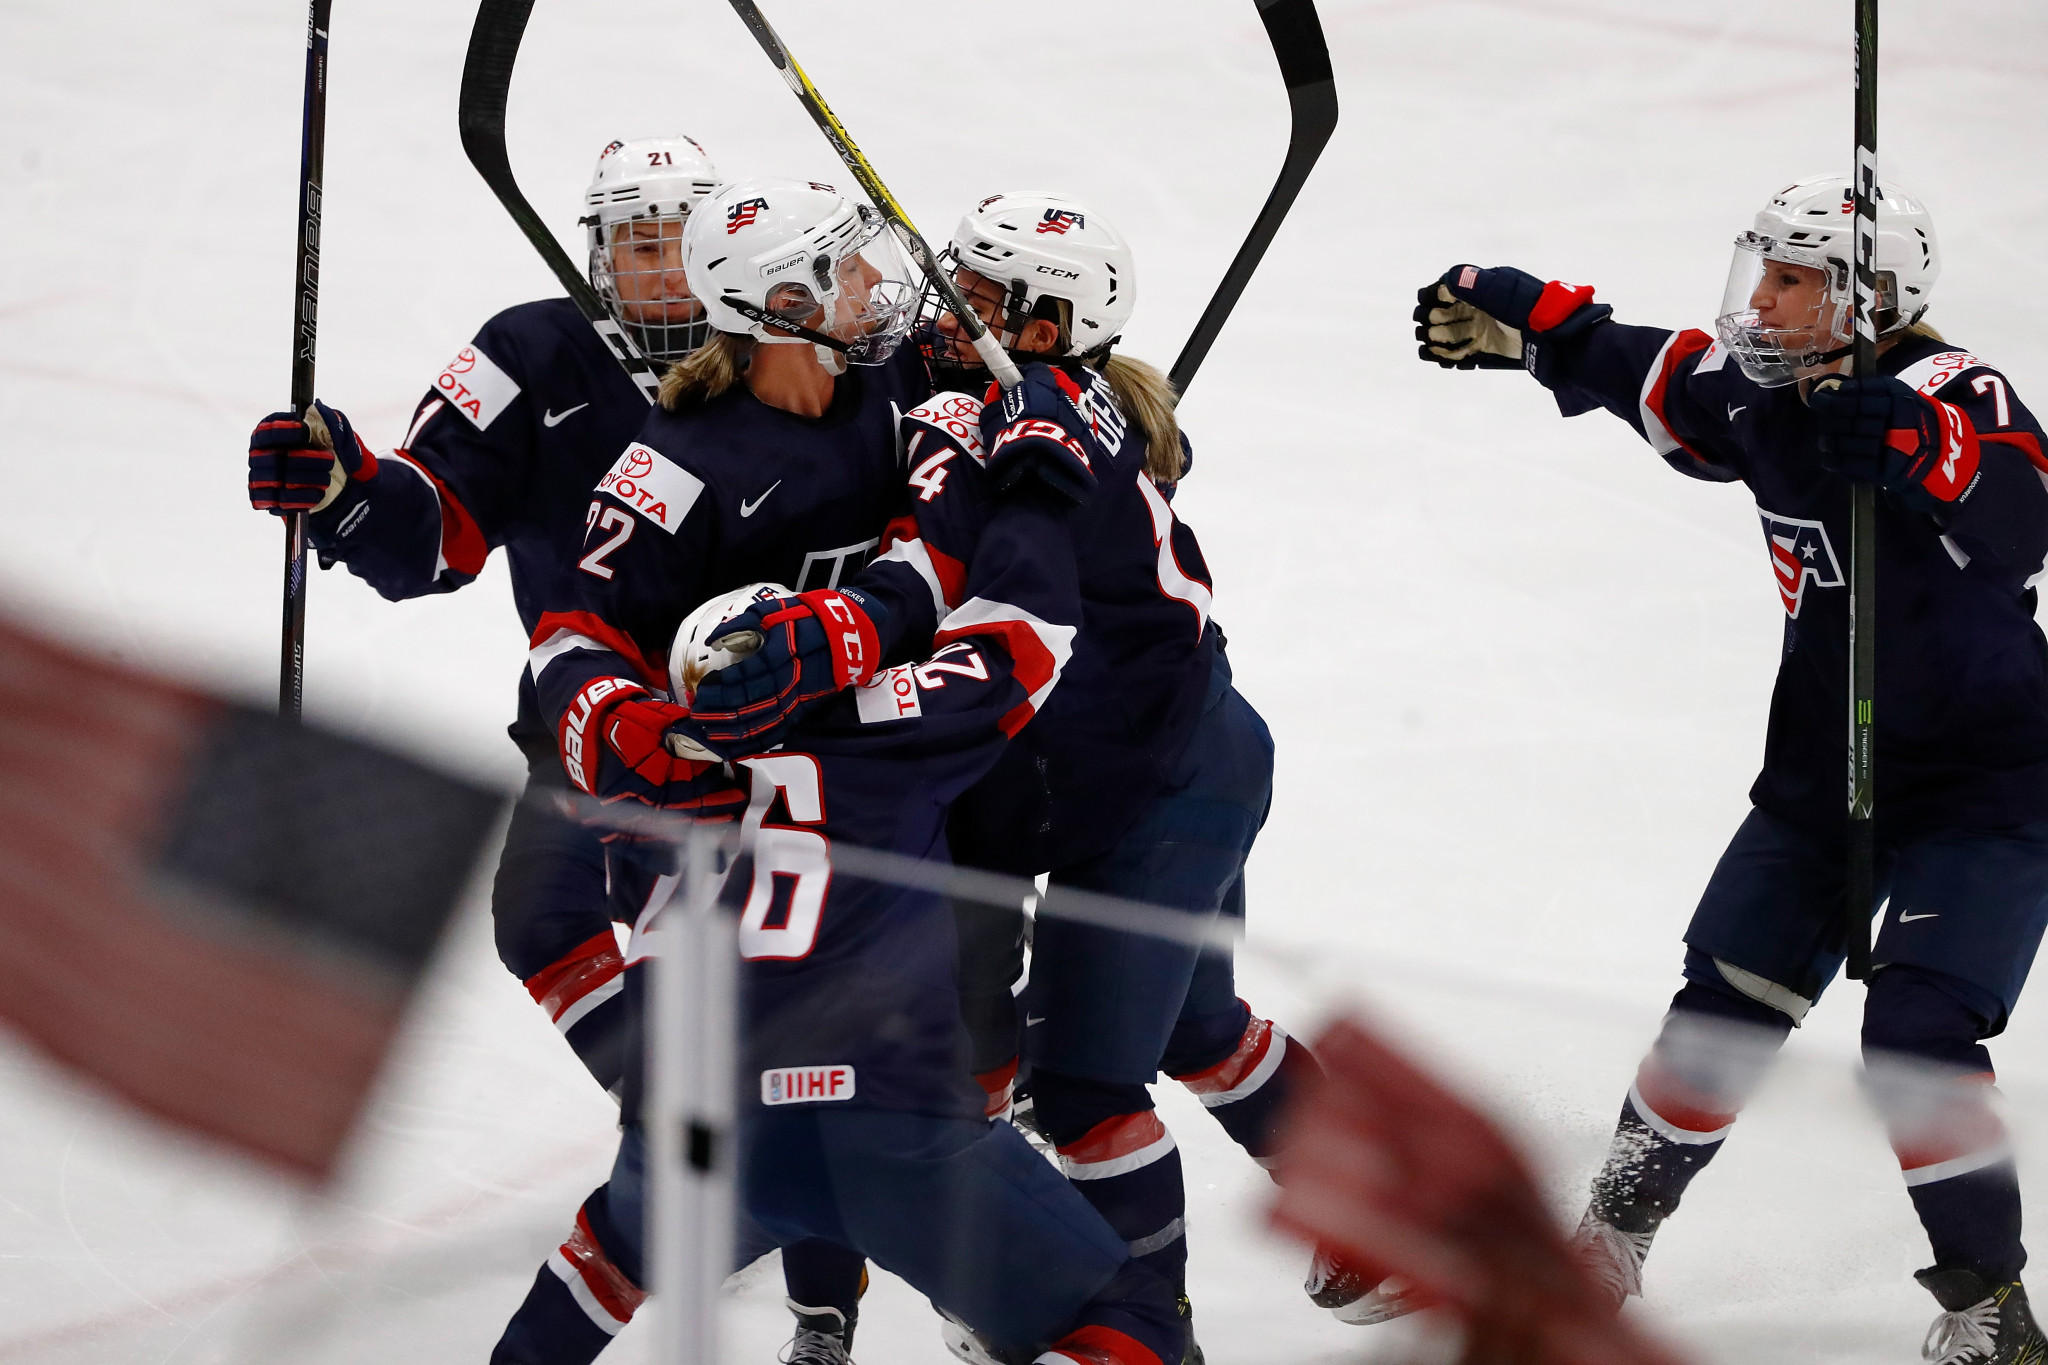 USA Hockey announce tour schedule as build-up continues to Pyeongchang 2018